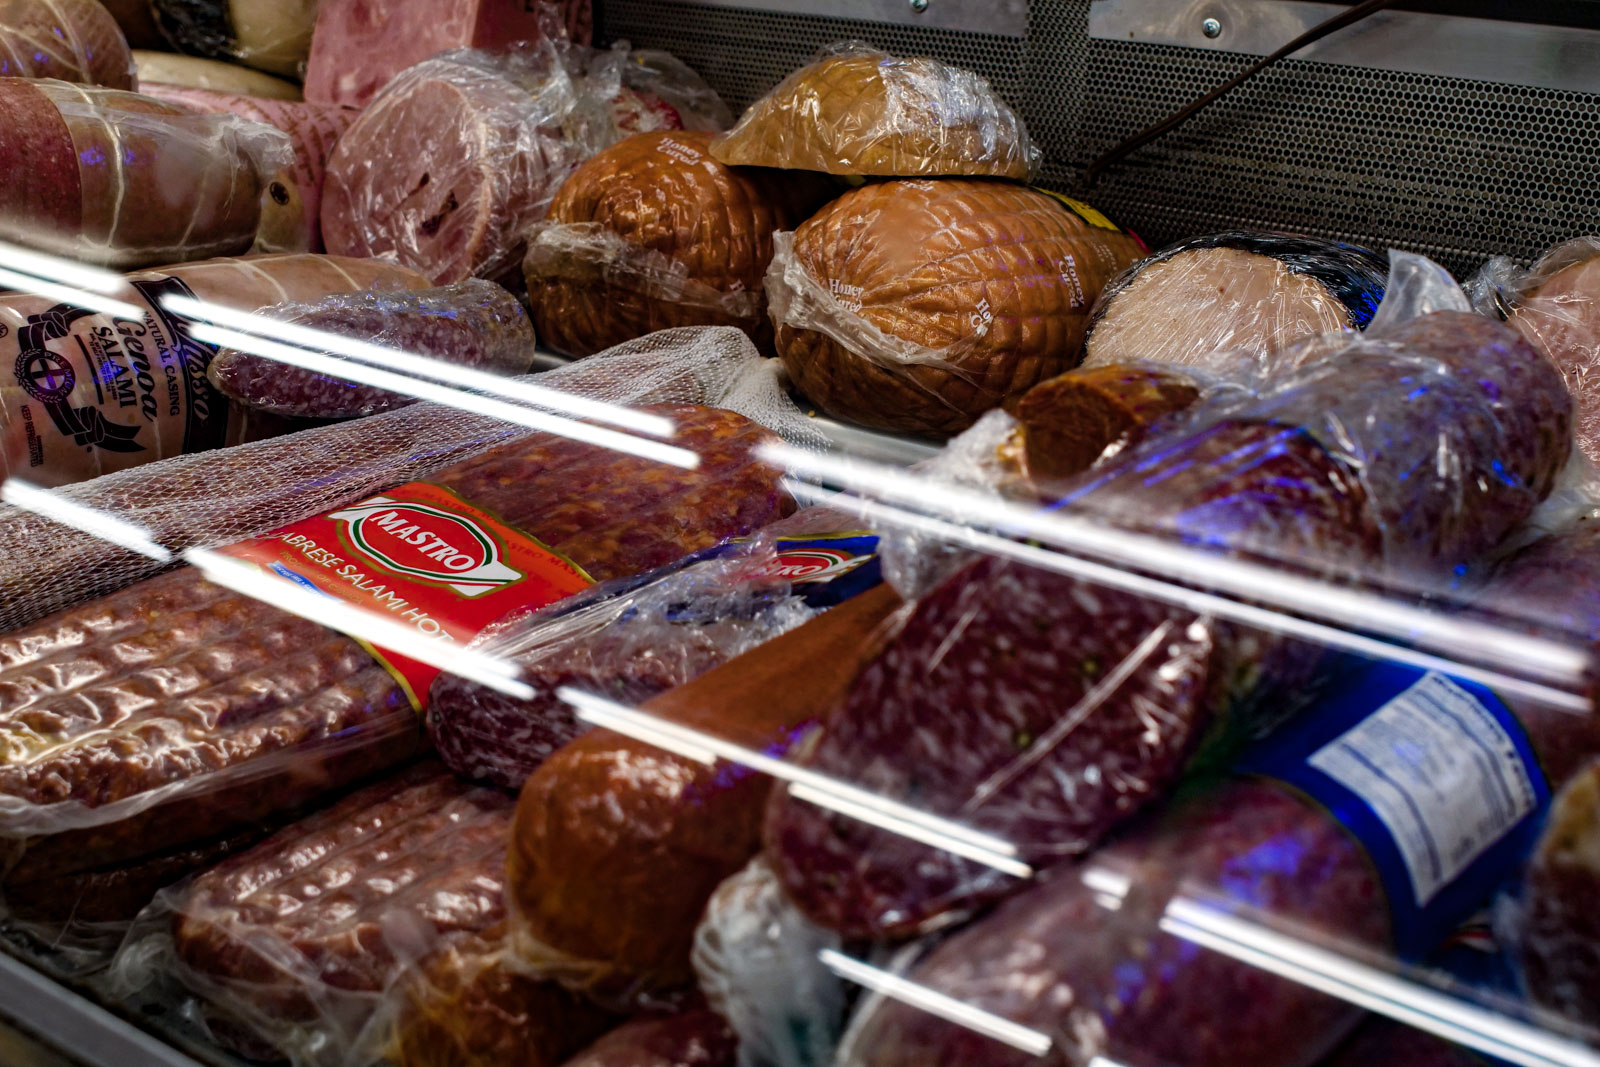 deli meat selection in refrigerator